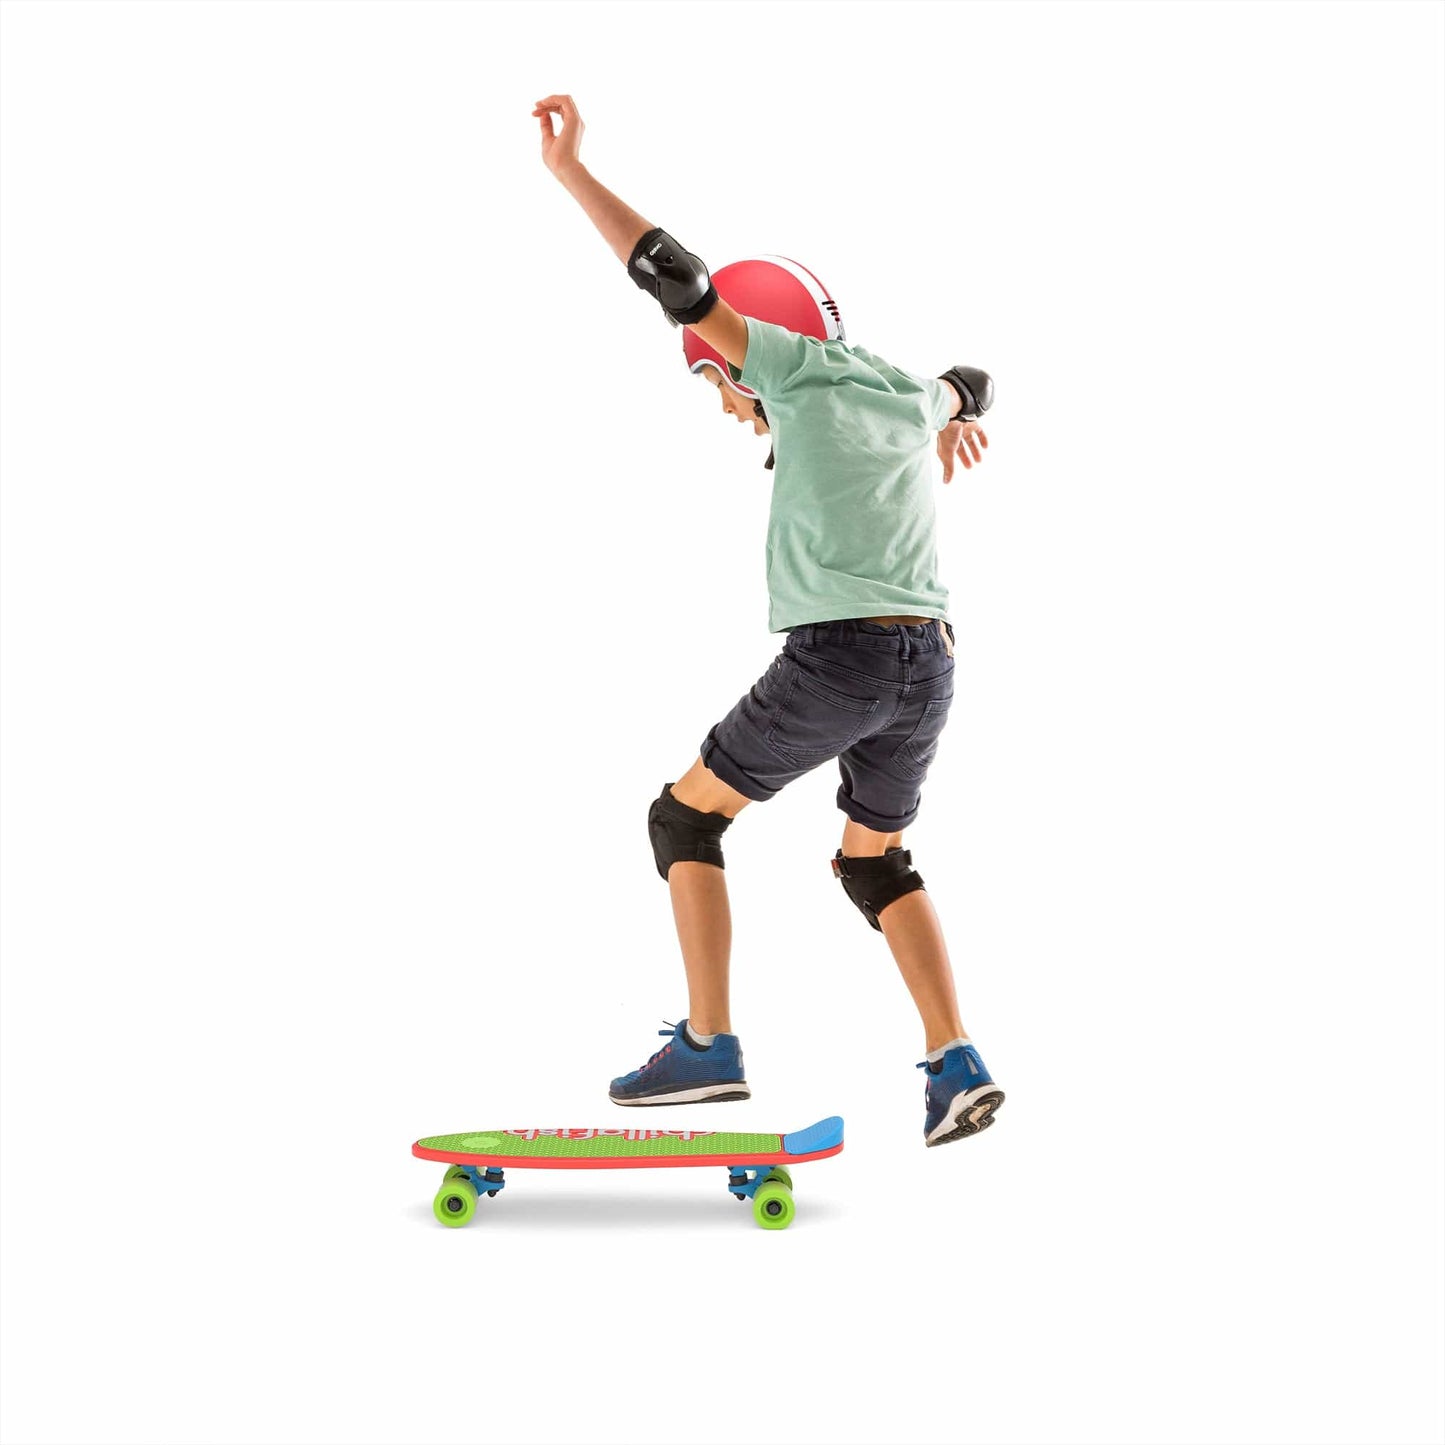 Chillafish Skatie Skateboard Red Mix Age 3+ - The Online Toy Shop5